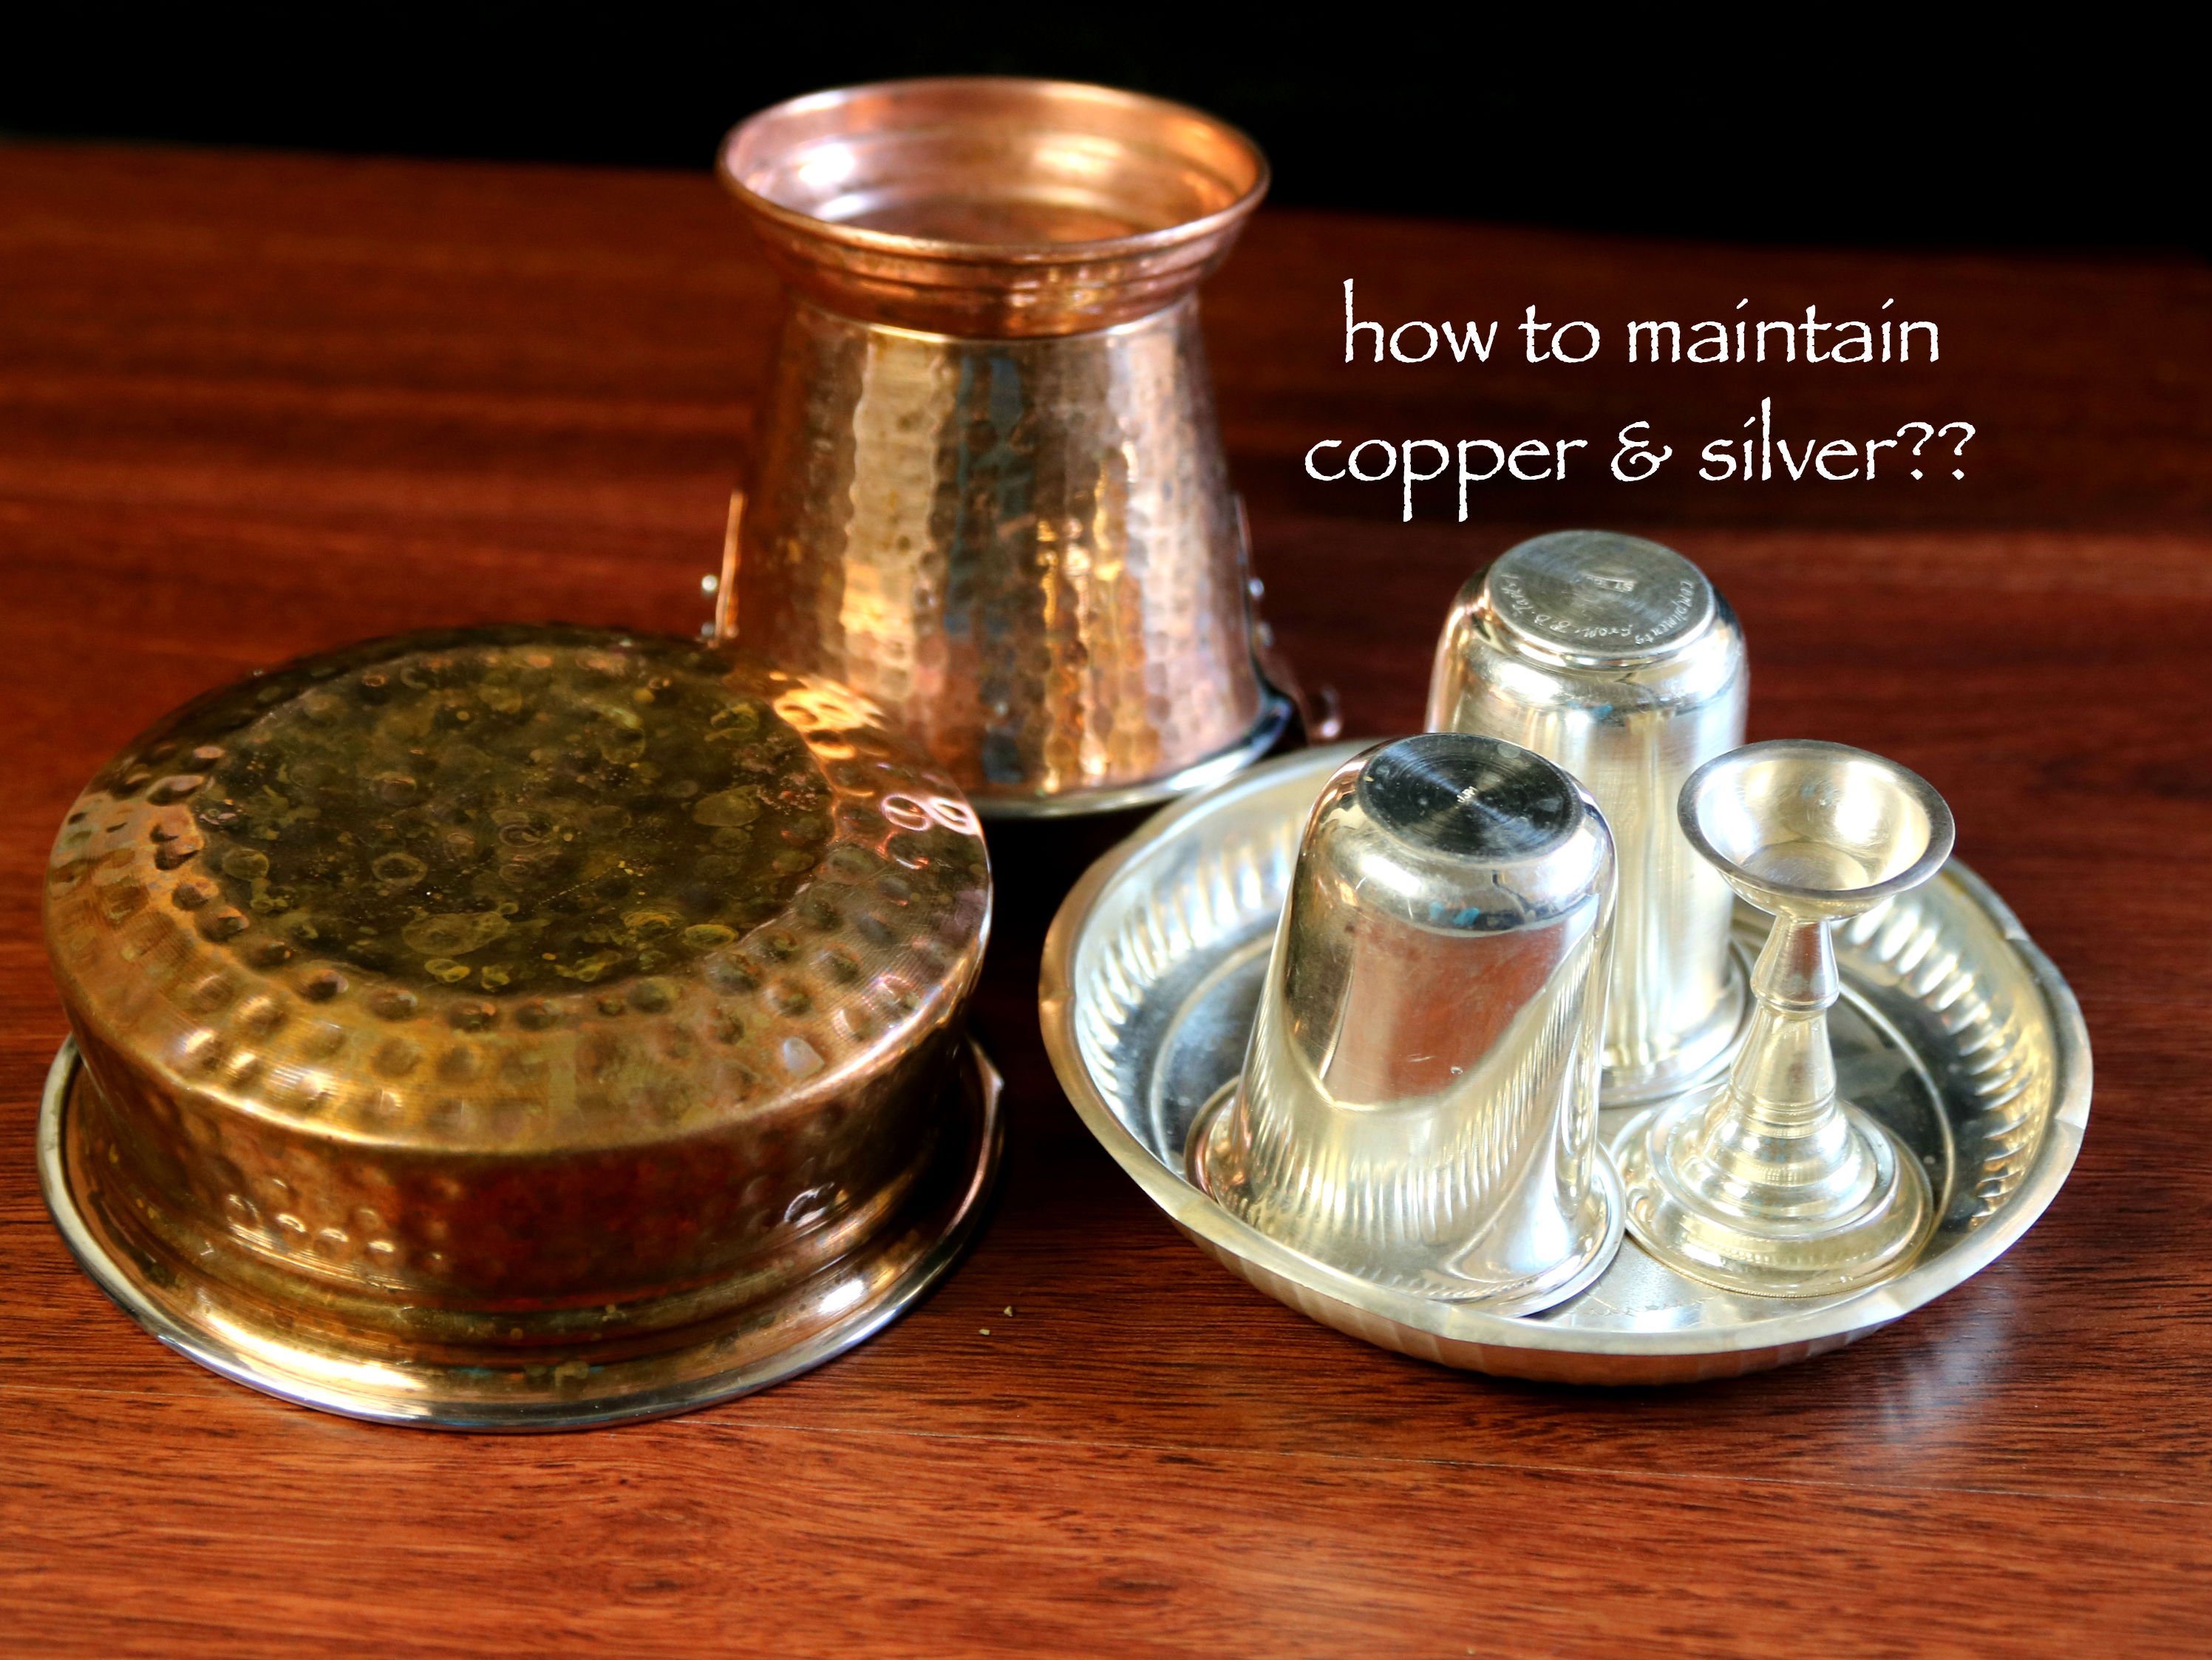 how to maintain and clean silver, copper and bronze vessels